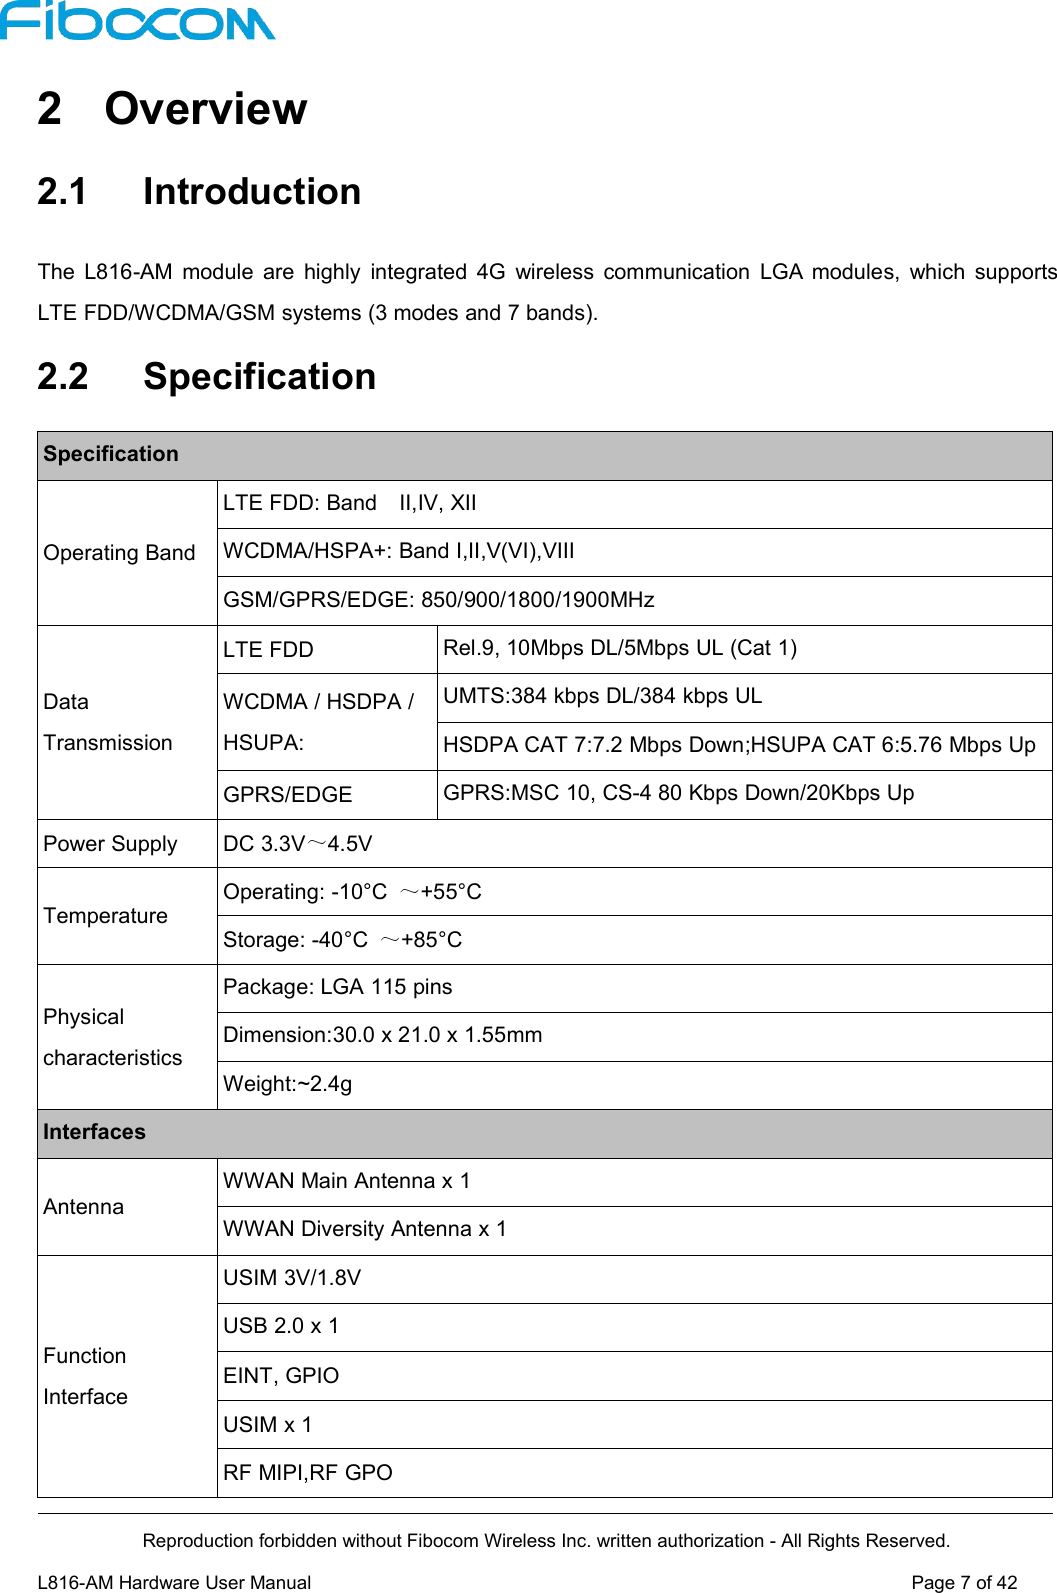 Reproduction forbidden without Fibocom Wireless Inc. written authorization - All Rights Reserved.L816-AM Hardware User Manual Page7of422 Overview2.1 IntroductionThe L816-AM module are highly integrated 4G wireless communication LGA modules, which supportsLTE FDD/WCDMA/GSM systems (3 modes and 7 bands).2.2 SpecificationSpecificationOperating BandLTE FDD: Band II,IV, XIIWCDMA/HSPA+: Band I,II,V(VI),VIIIGSM/GPRS/EDGE: 850/900/1800/1900MHzDataTransmissionLTE FDDRel.9, 10Mbps DL/5Mbps UL (Cat 1)WCDMA / HSDPA /HSUPA:UMTS:384 kbps DL/384 kbps ULHSDPA CAT 7:7.2 Mbps Down;HSUPA CAT 6:5.76 Mbps UpGPRS/EDGEGPRS:MSC 10, CS-4 80 Kbps Down/20Kbps UpPower SupplyDC 3.3V～4.5VTemperatureOperating: -10°C ～+55°CStorage: -40°C ～+85°CPhysicalcharacteristicsPackage: LGA 115 pinsDimension:30.0 x 21.0 x 1.55mmWeight:~2.4gInterfacesAntennaWWAN Main Antenna x 1WWAN Diversity Antenna x 1FunctionInterfaceUSIM 3V/1.8VUSB 2.0 x 1EINT, GPIOUSIM x 1RF MIPI,RF GPO